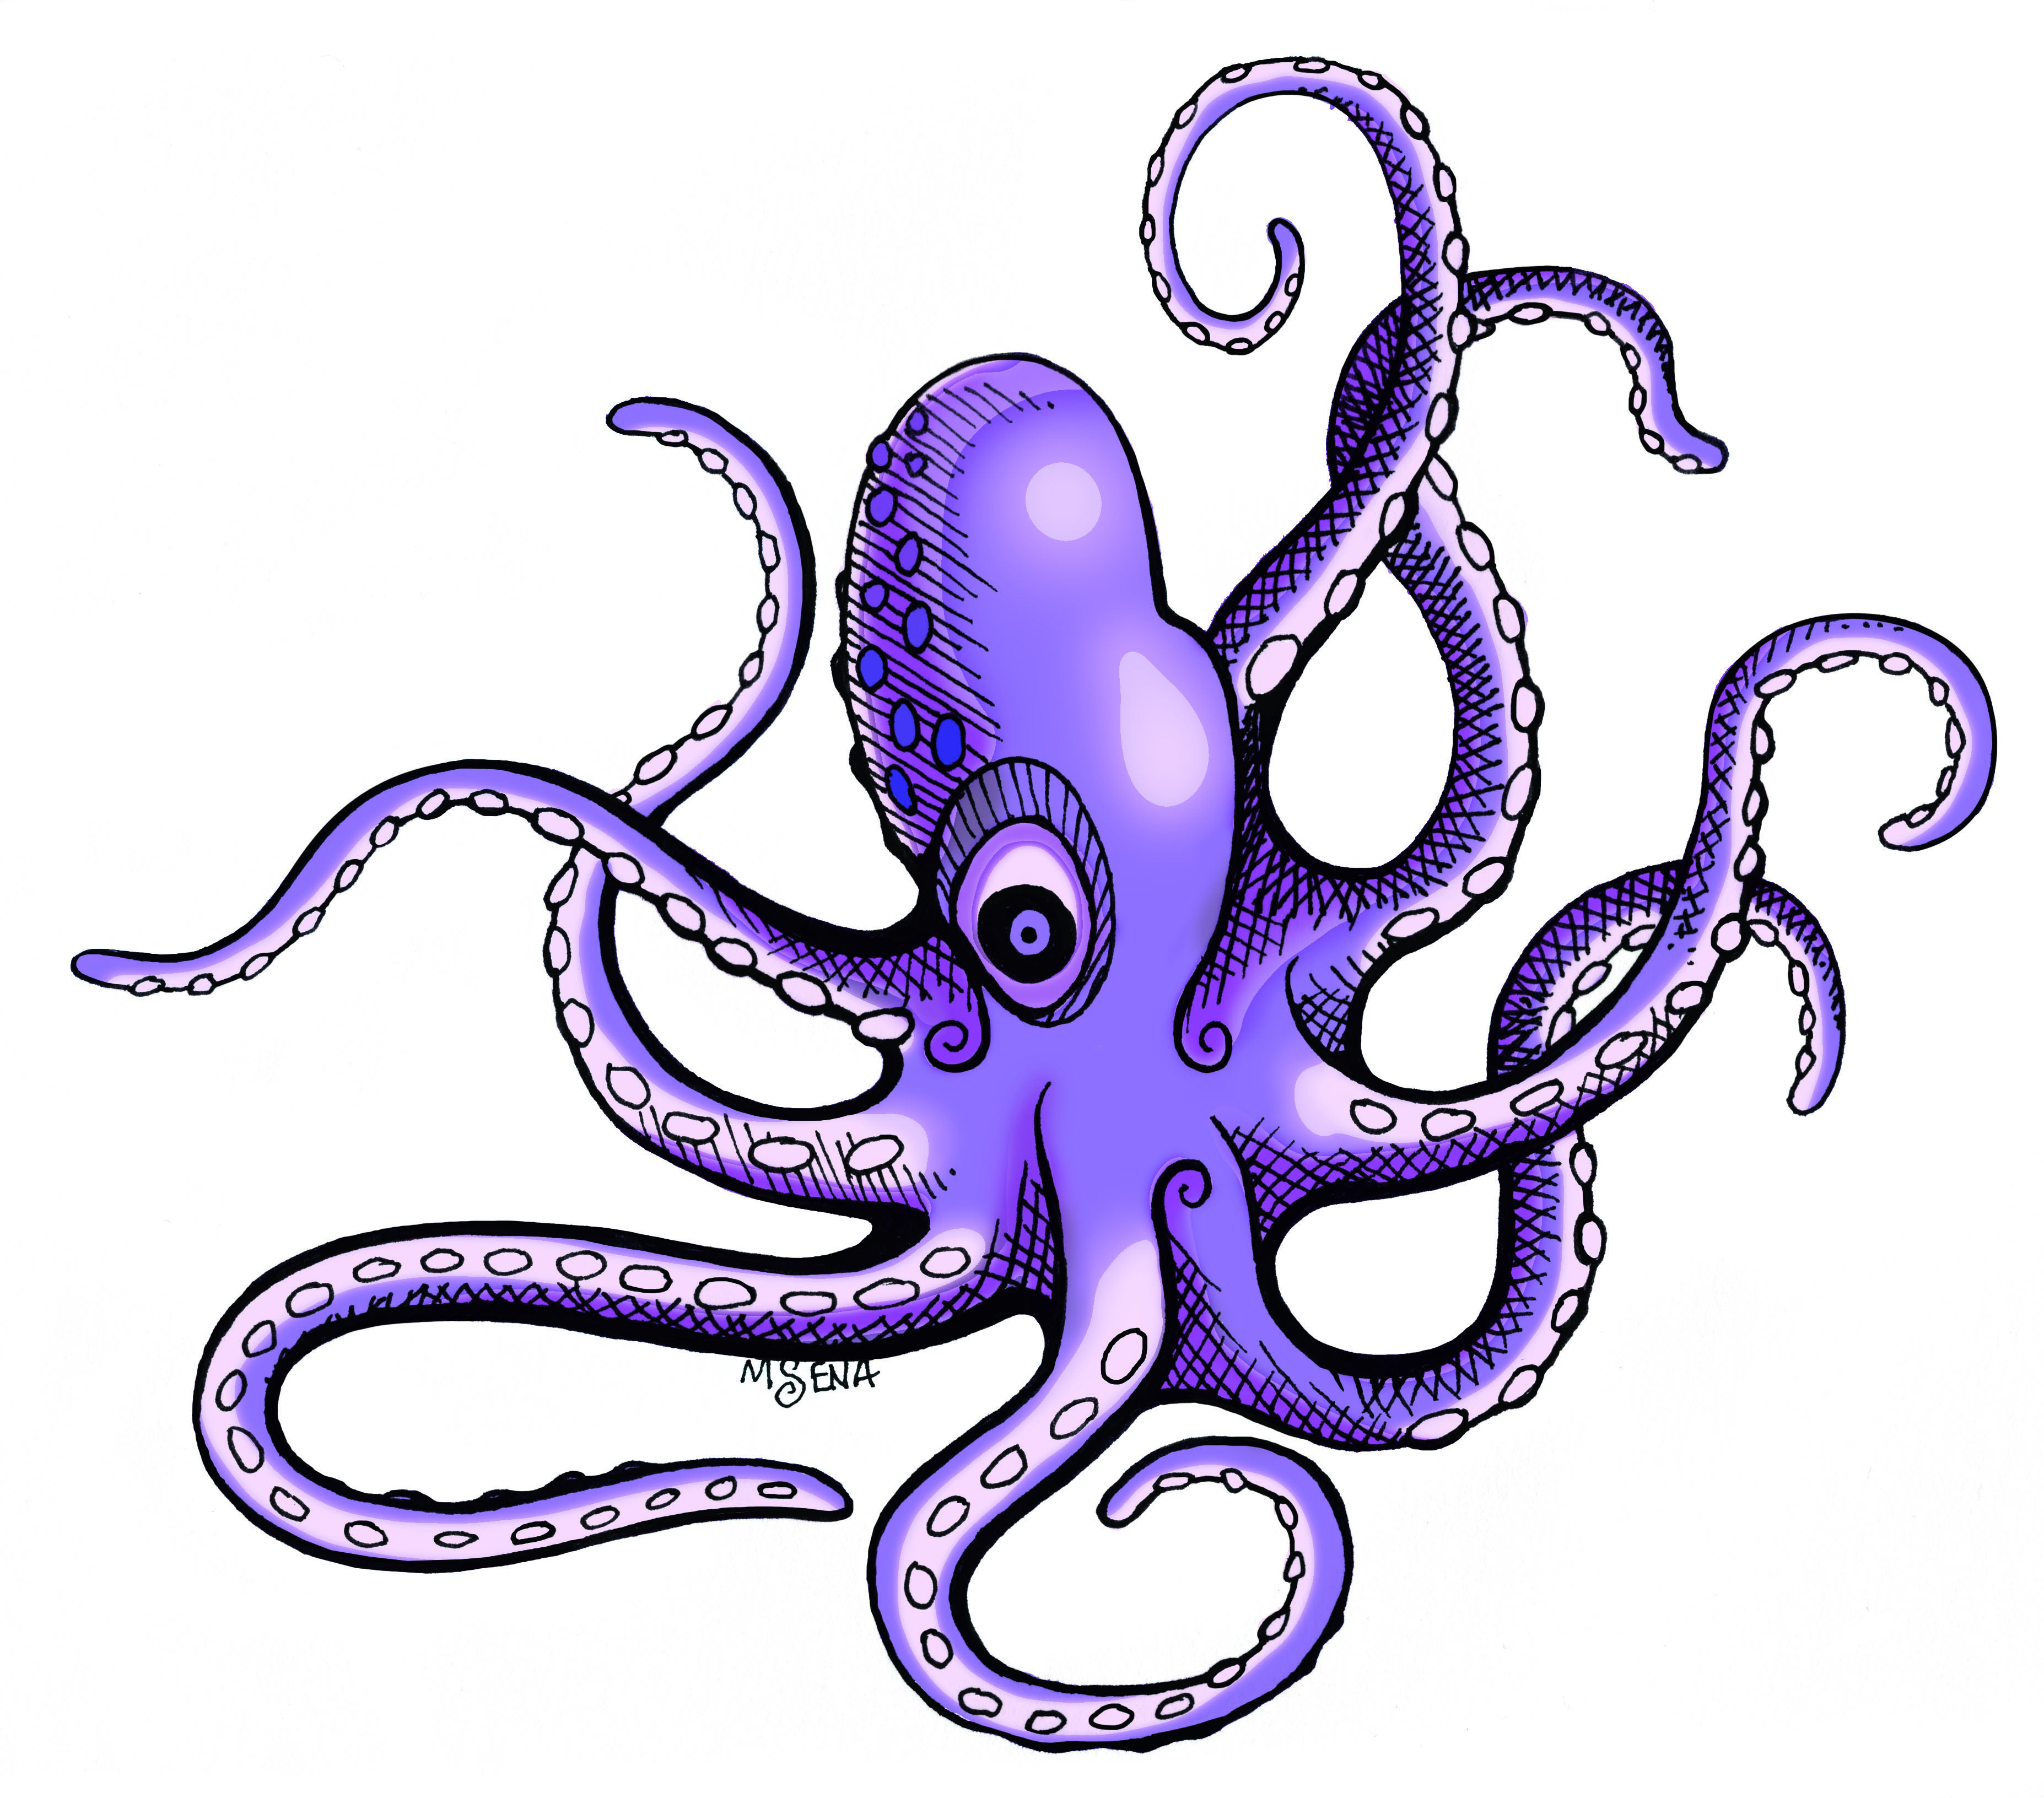 Title: Octopus Two. From Doodle 77. Illustrated by Miyuki Sena with mxed media.